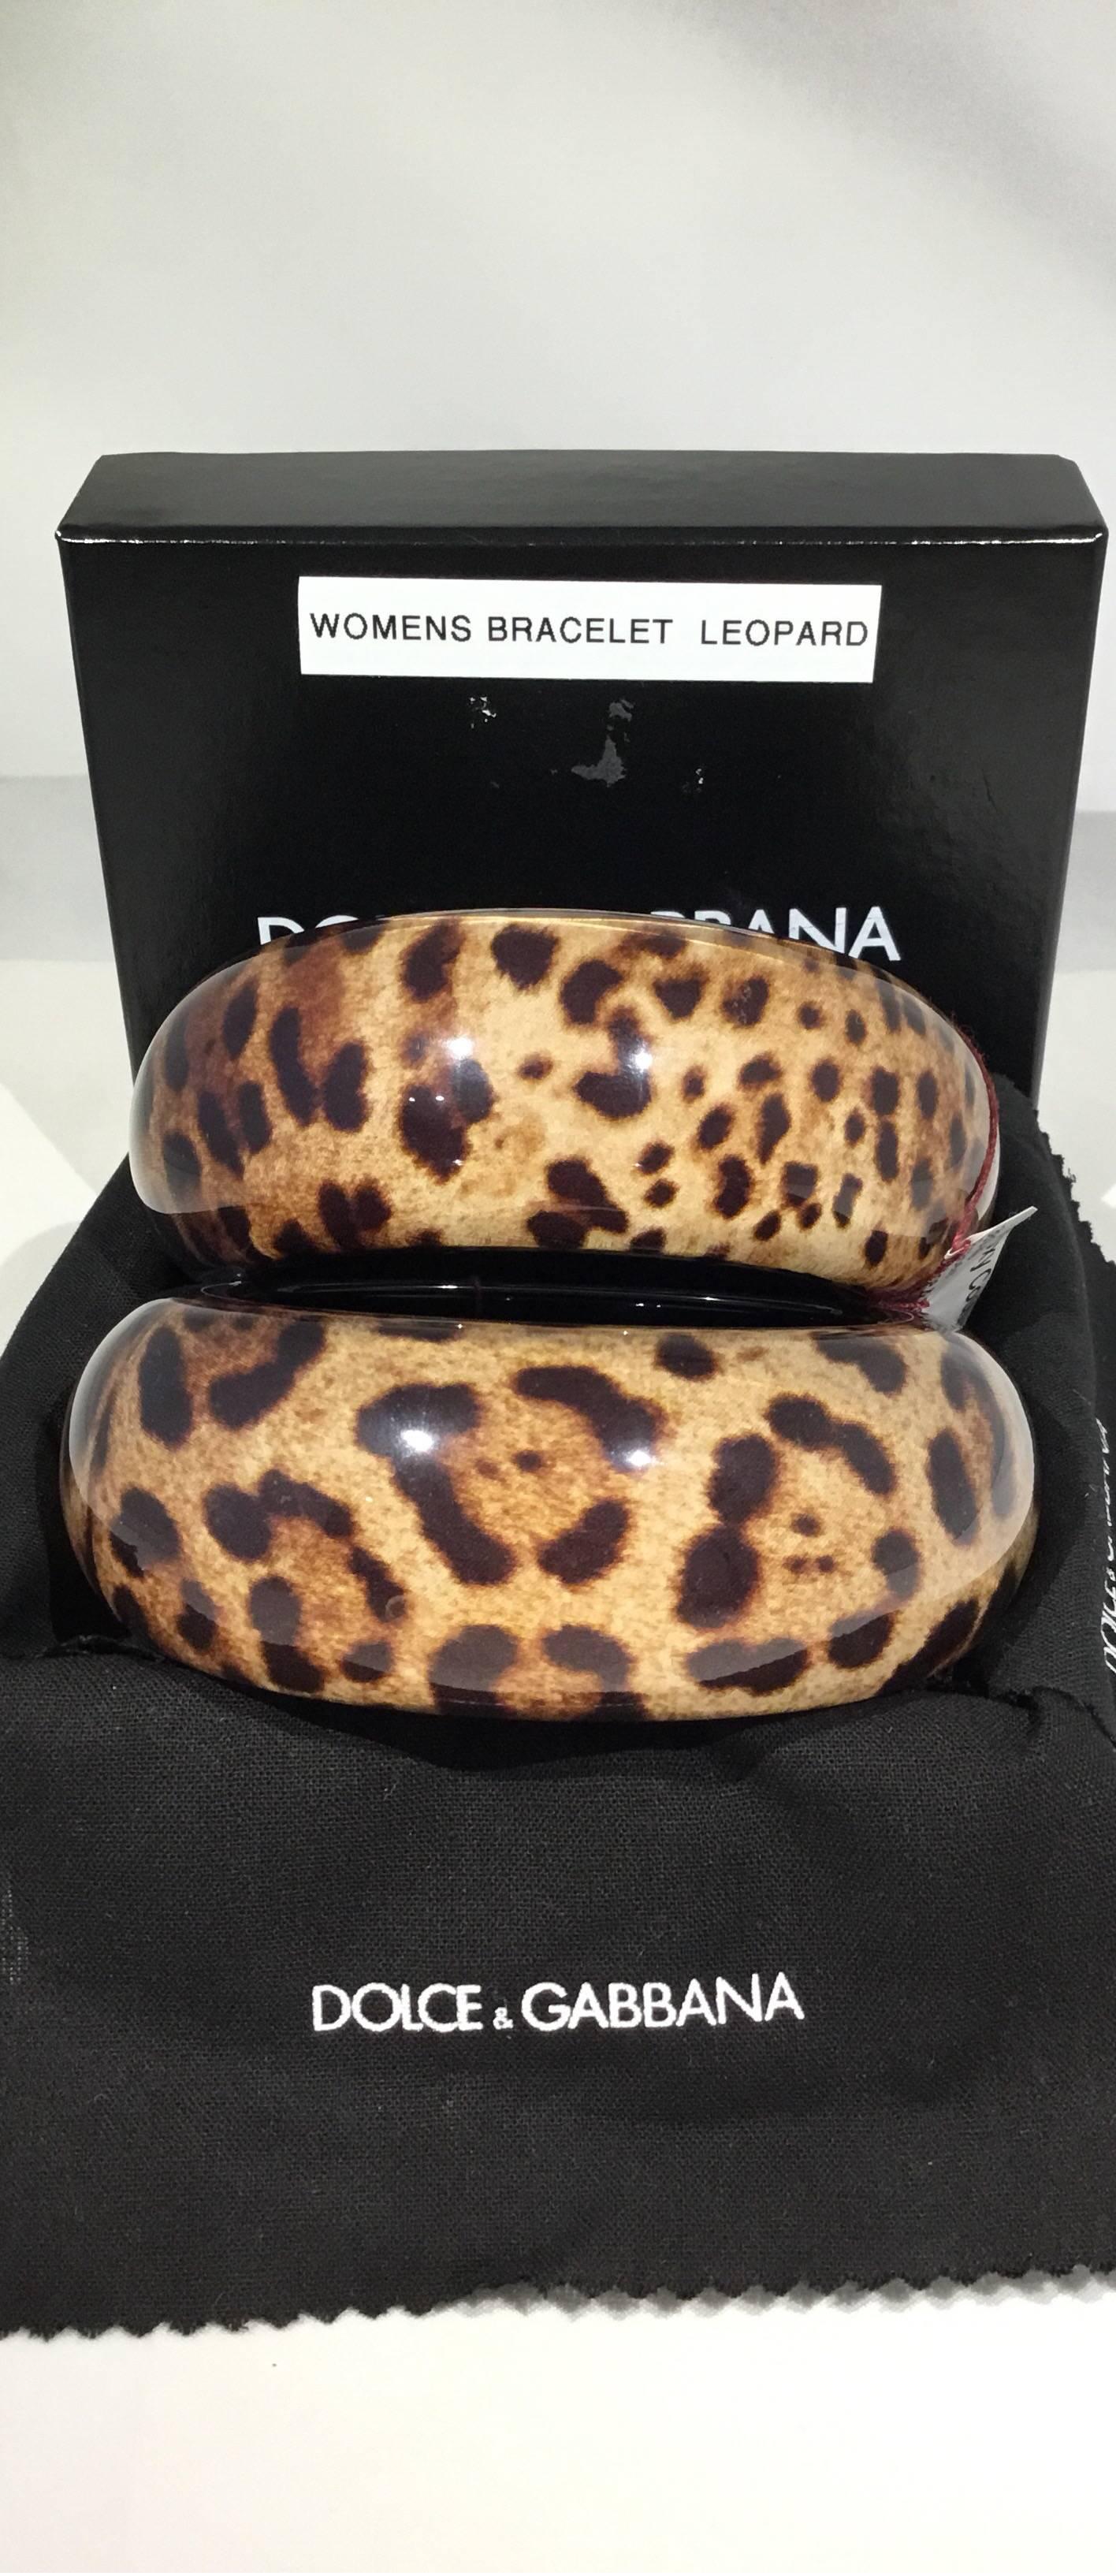 Dolce & Gabbana lucite bangles feature a Leopard Print. Box included. Circumference 8”, excellent condition!